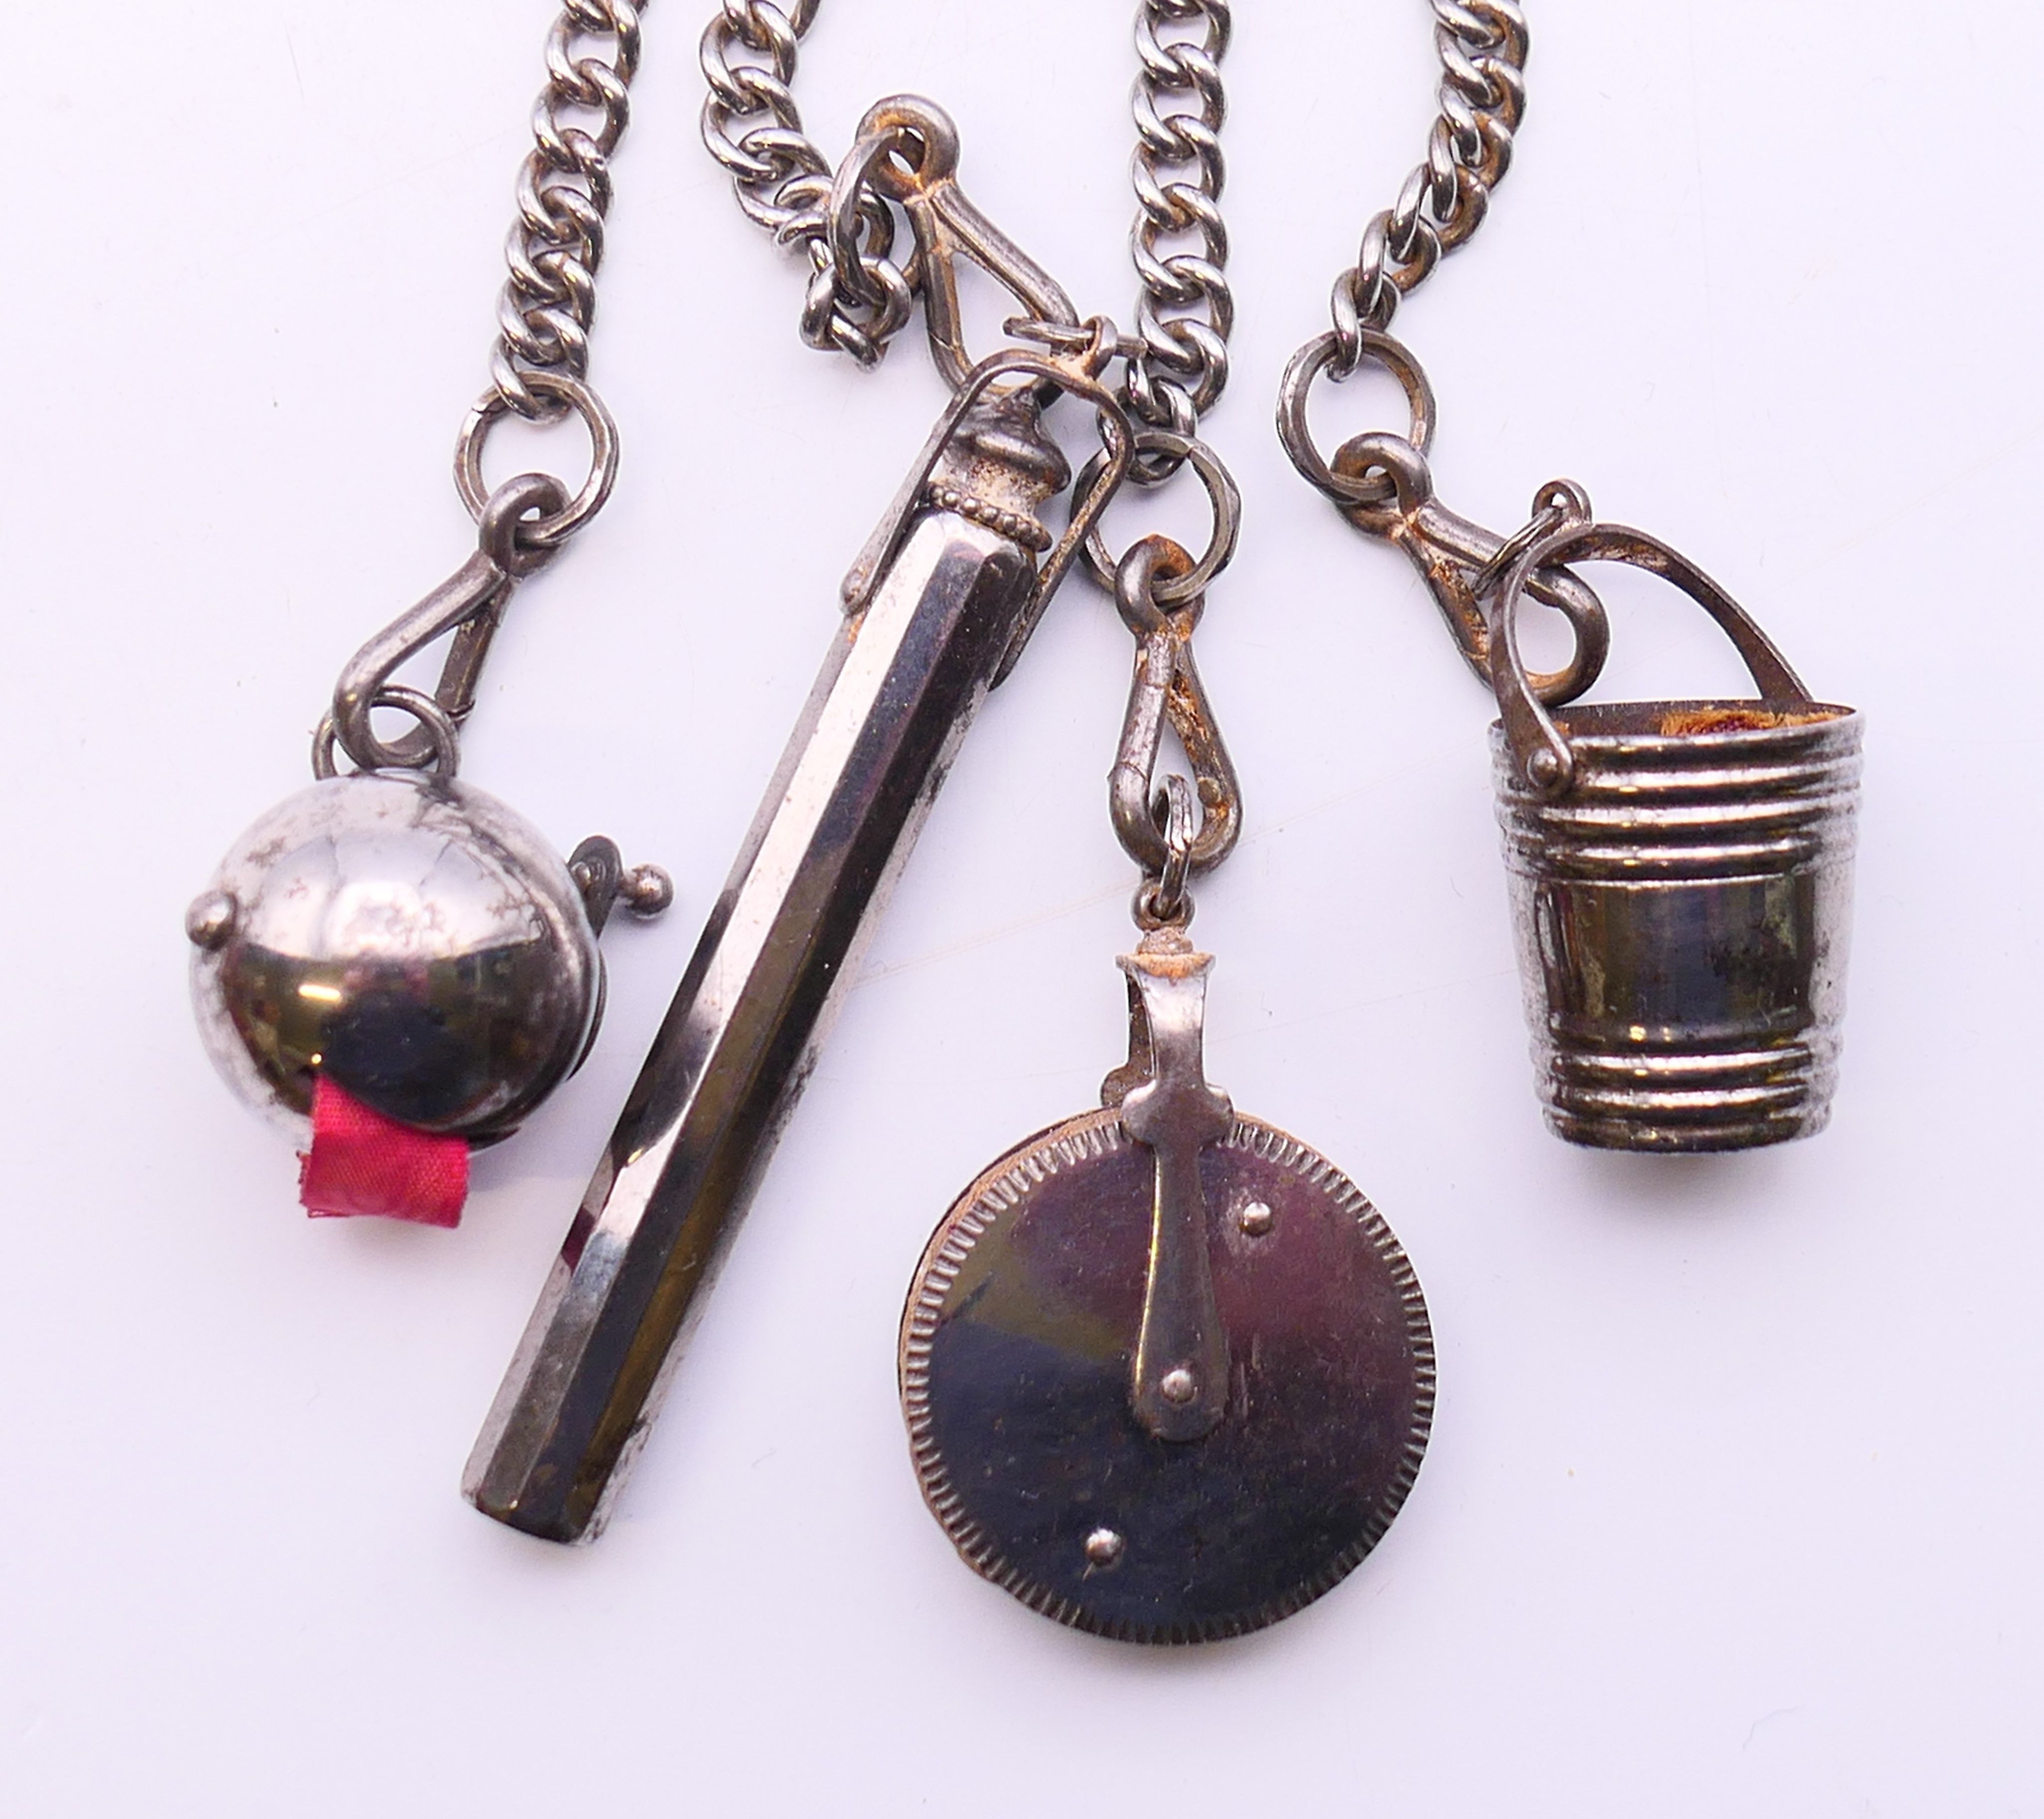 A 19th century steel chatelaine consisting of four implements on chains leading to a horseshoe - Image 3 of 4